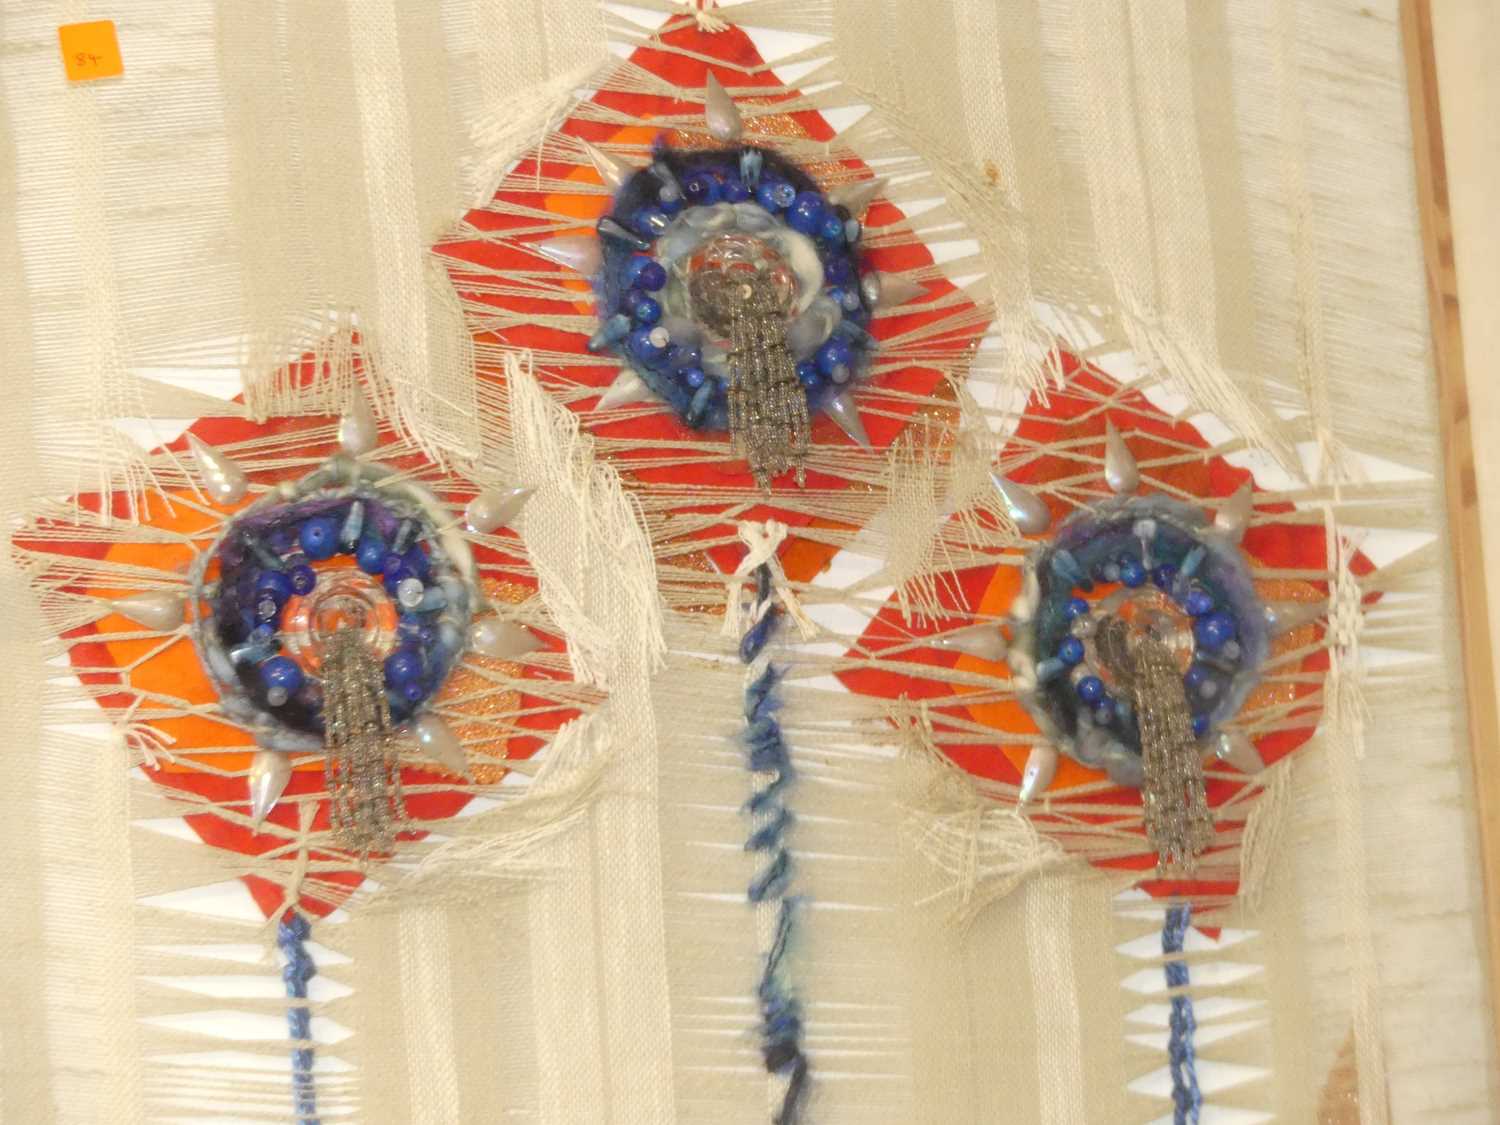 Sunny Sandeman-Allen - Three flowers, mixed media with textiles and glass beads, 72 x 54cm, in - Image 2 of 3